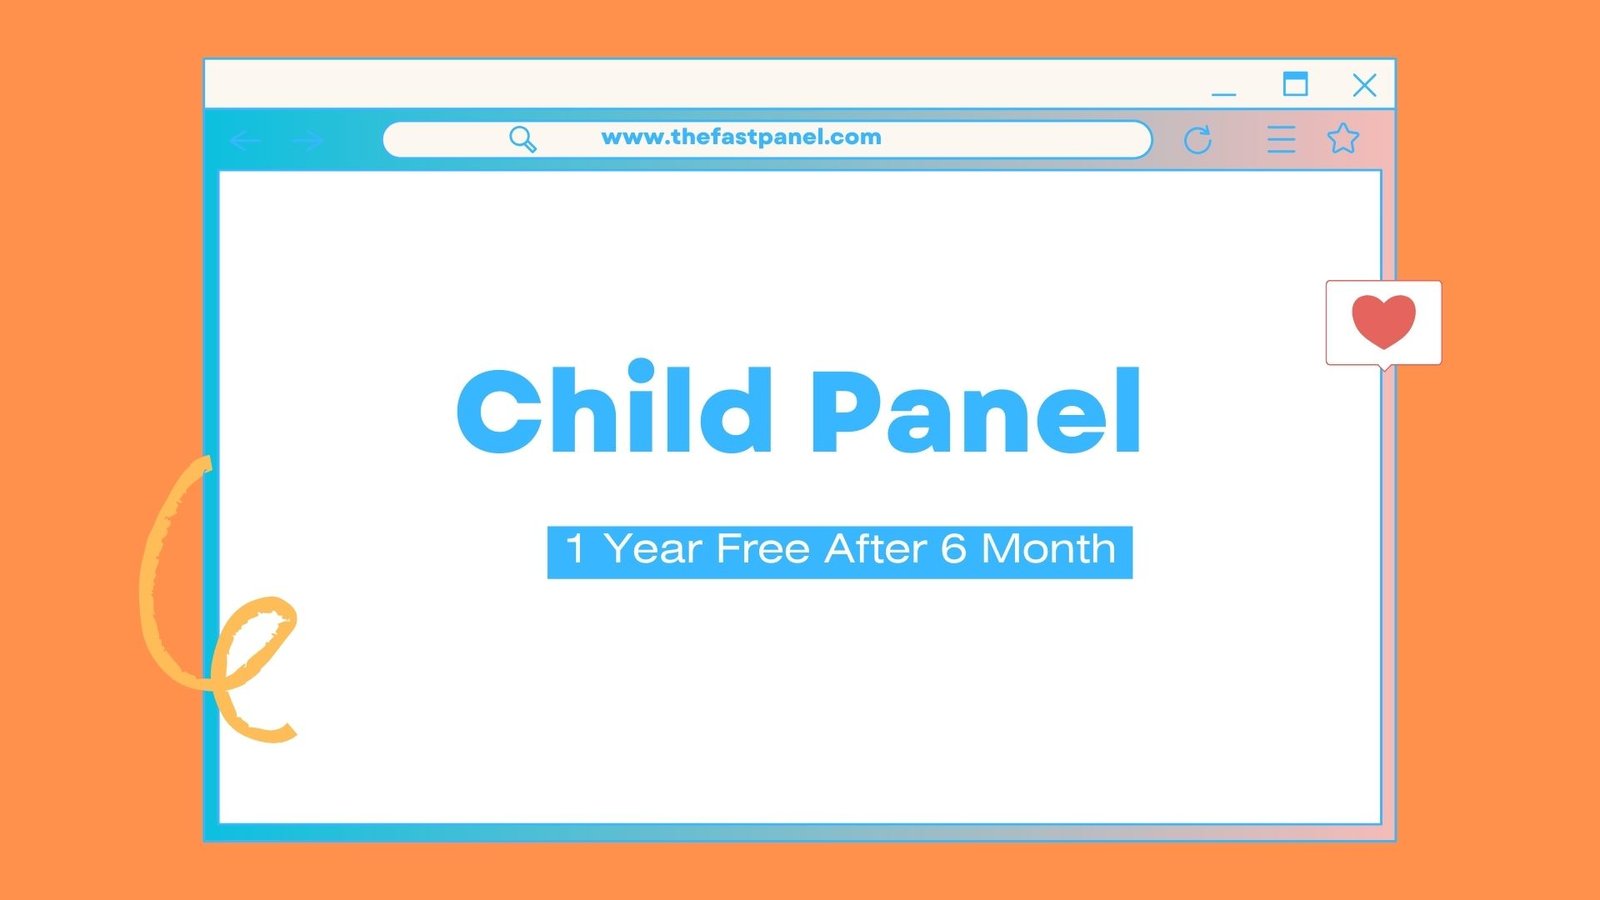 What are Child Panels and how do they differ from regular SMM Panel?